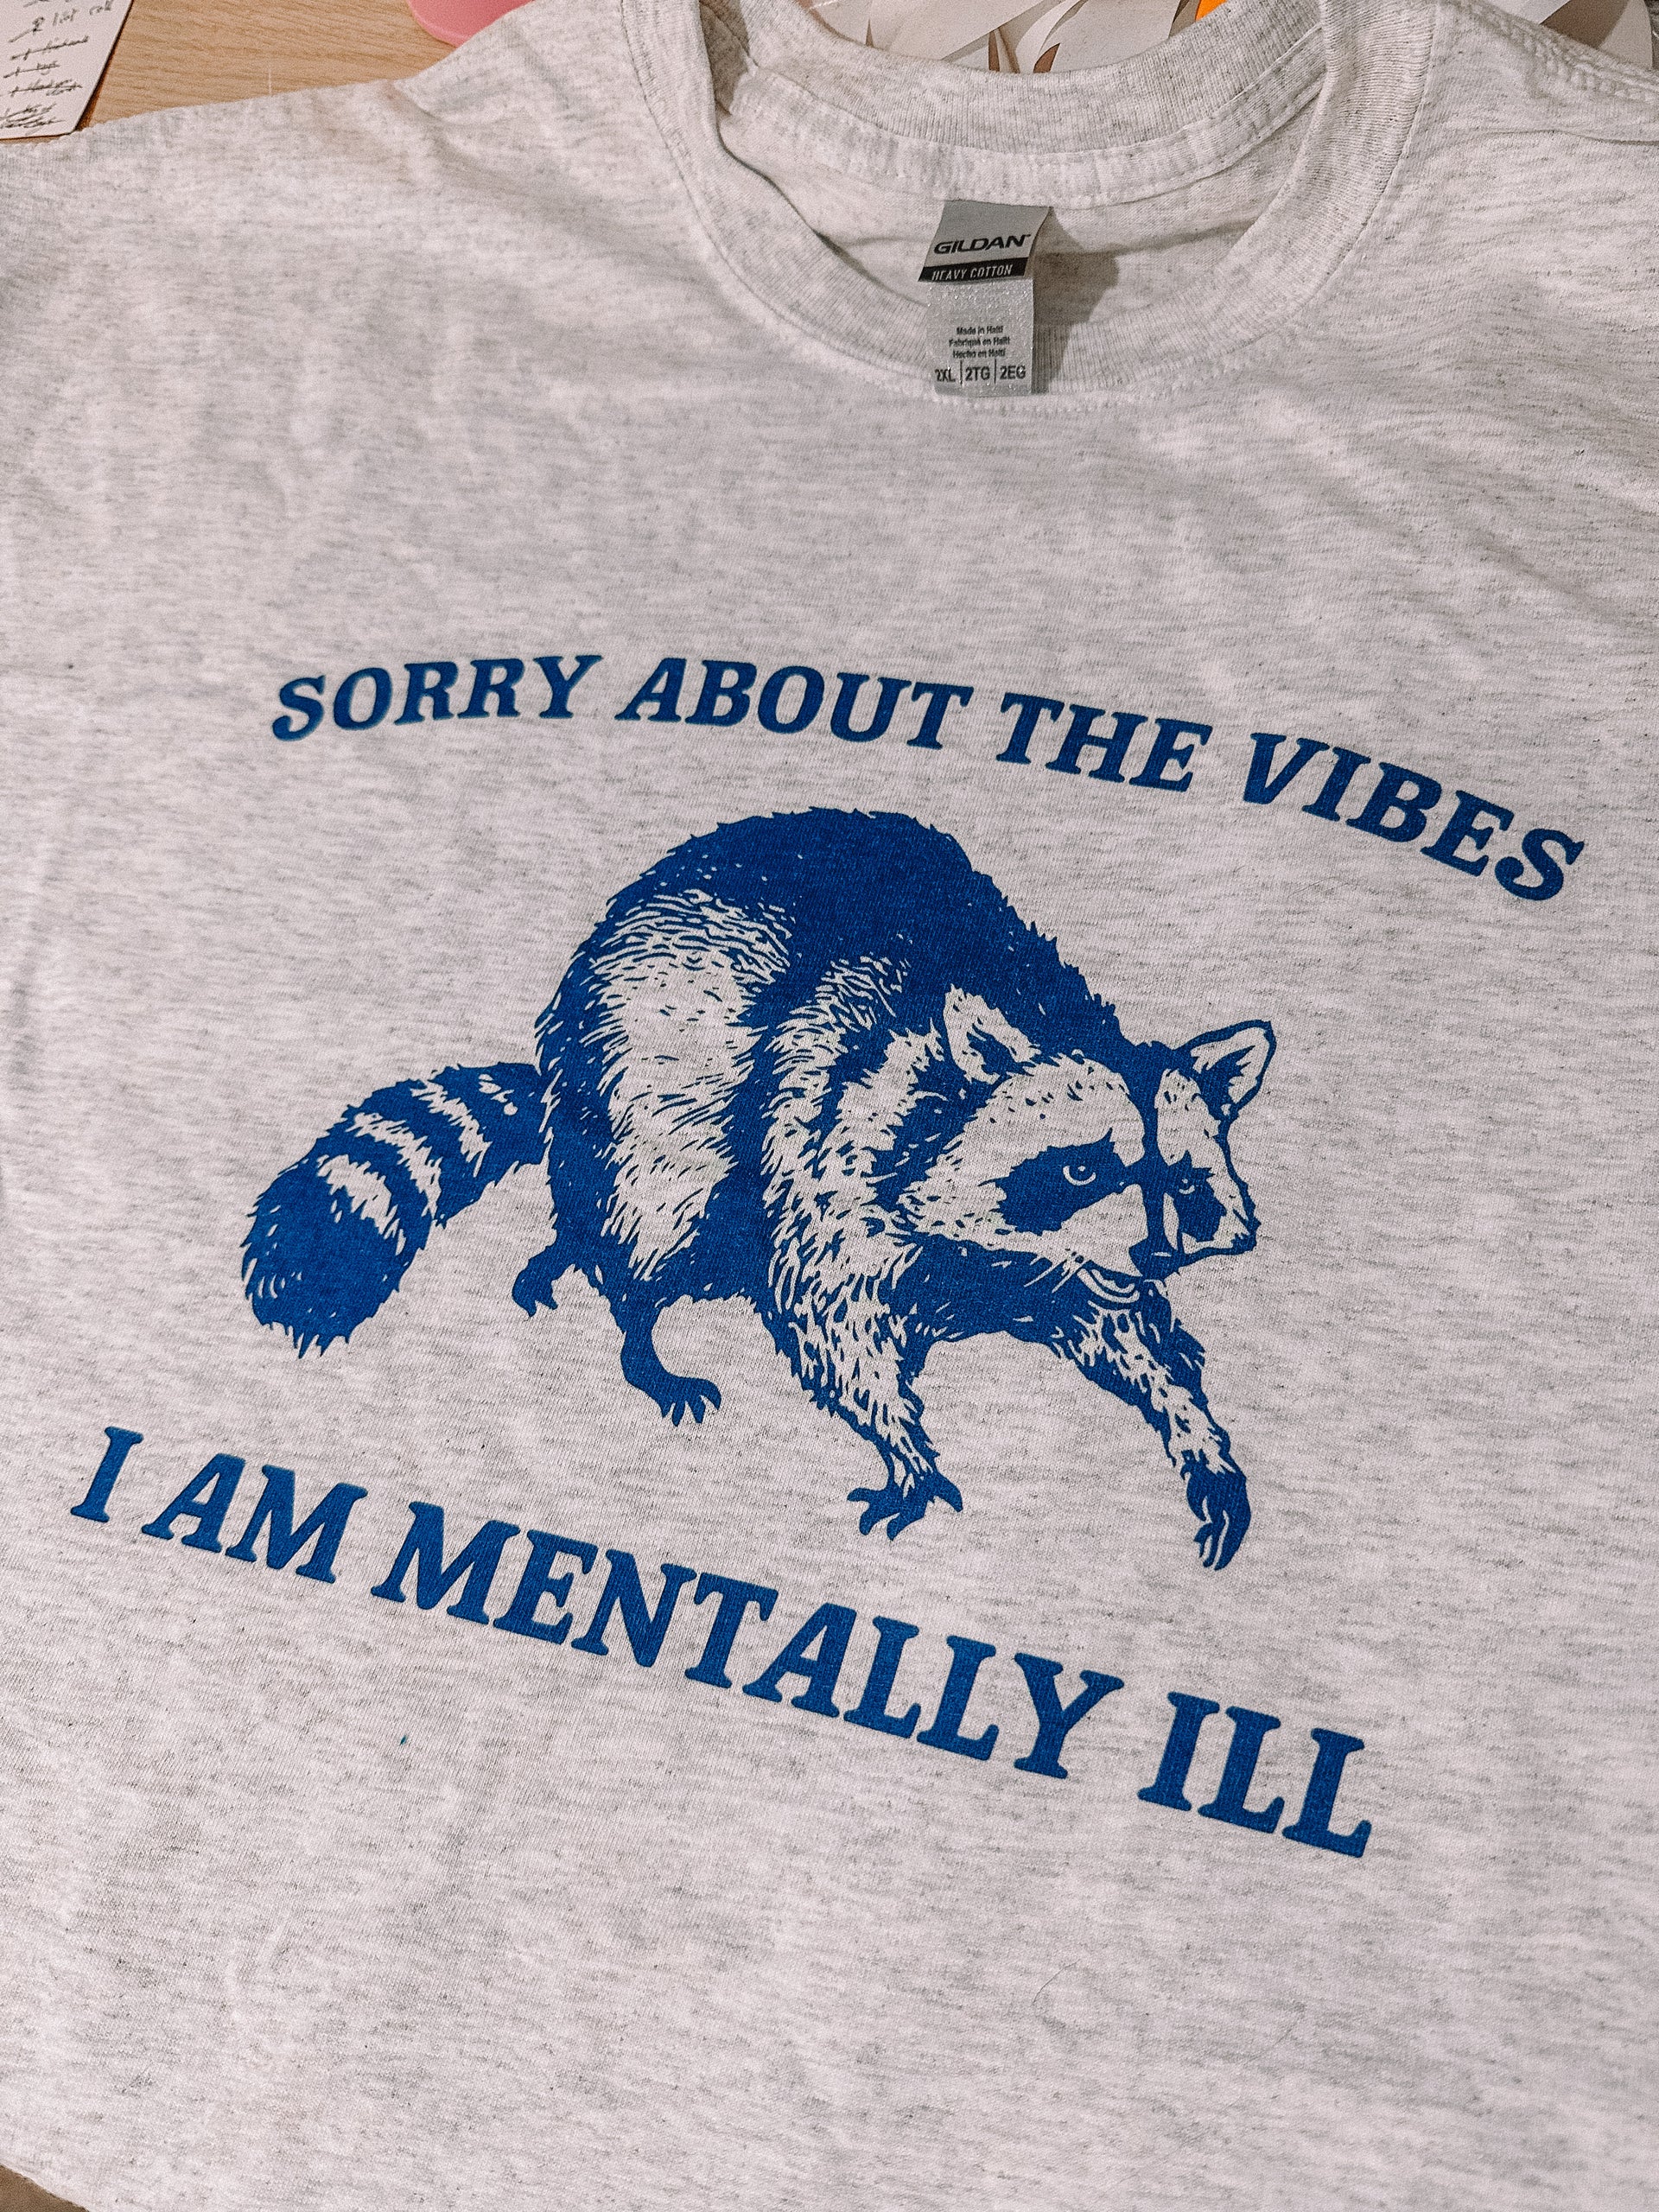 Sorry About The Vibes tee